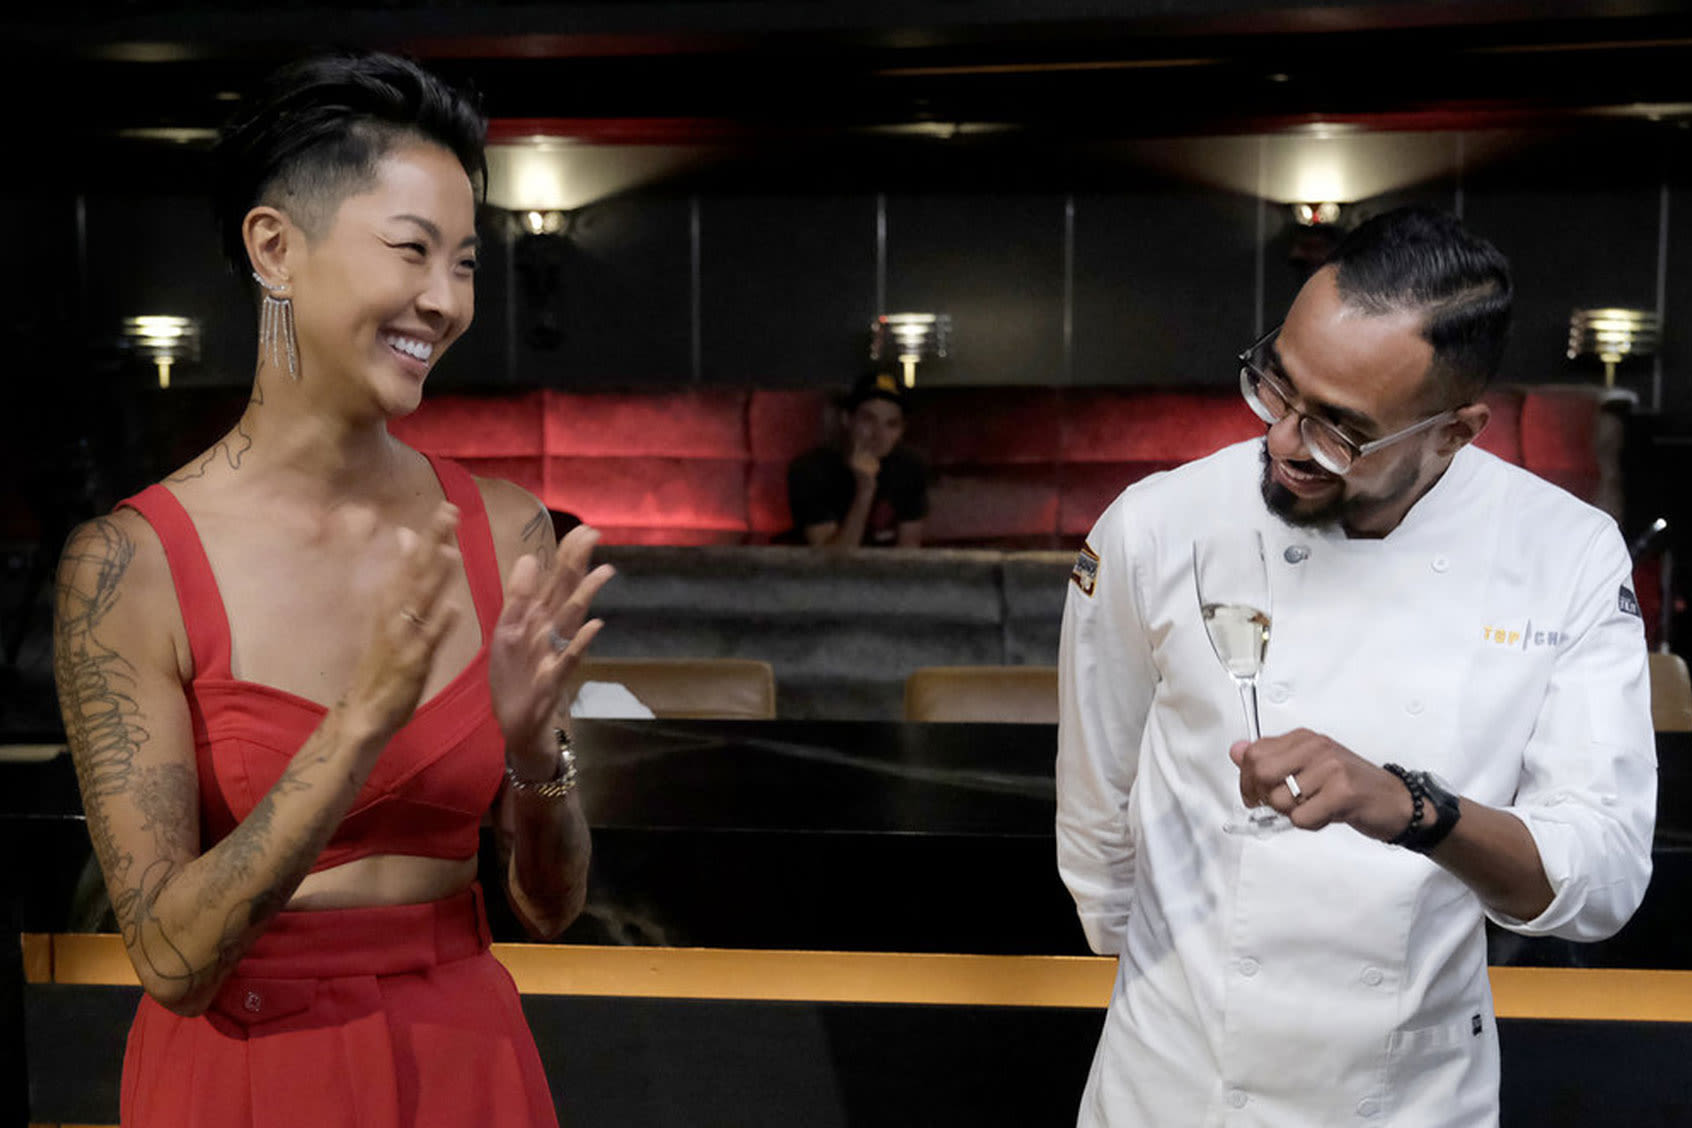 "Top Chef" finale does a disservice to its incredibly talented and deserving winner